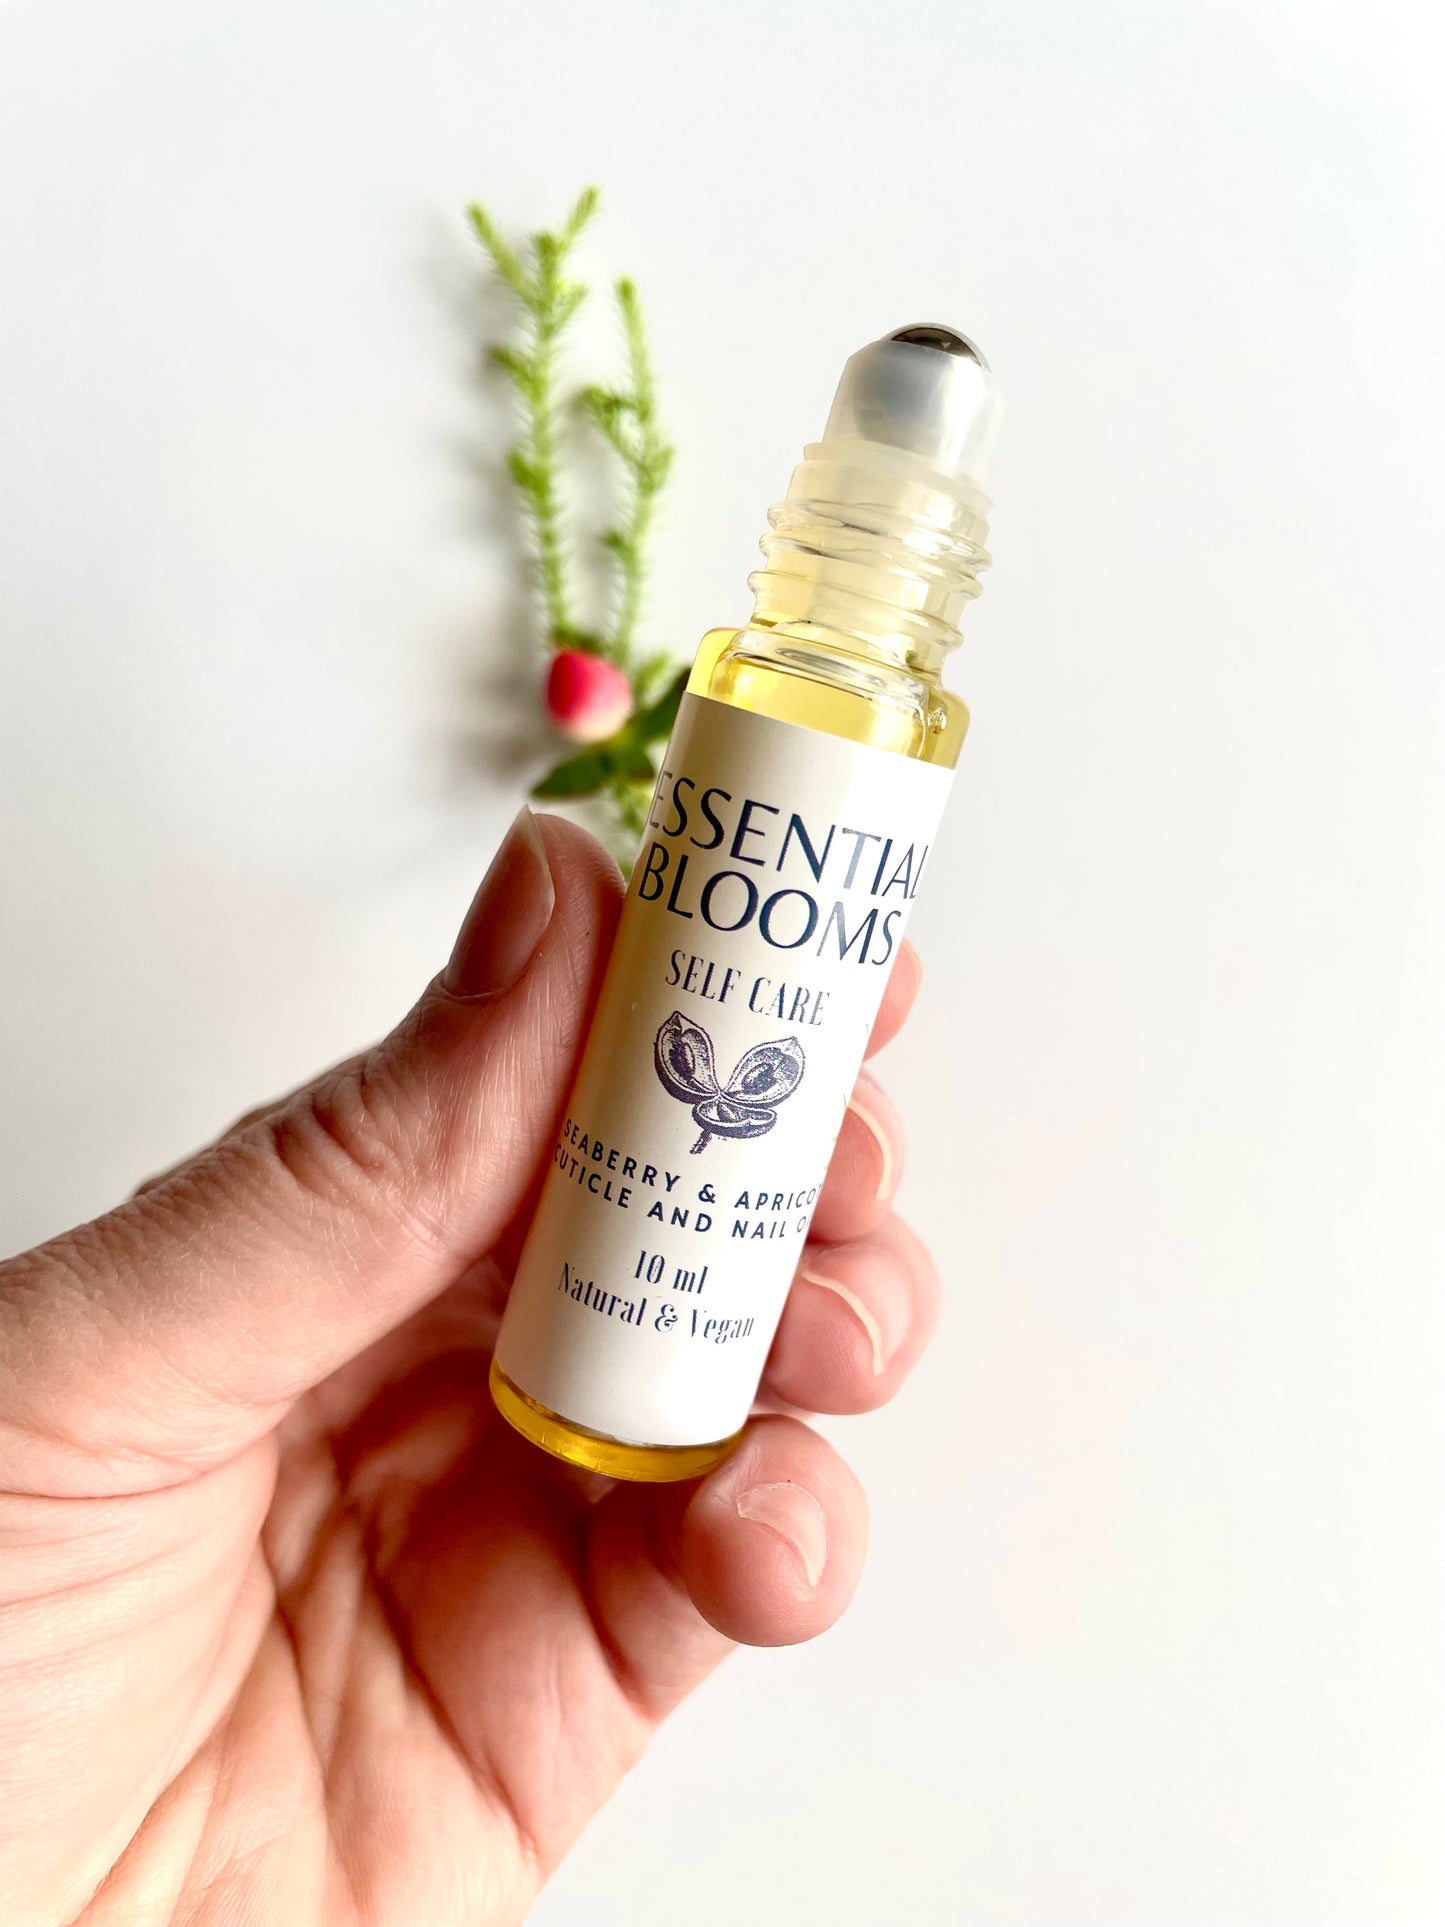 Seaberry & Apricot Cuticle and Nail Growth Oil